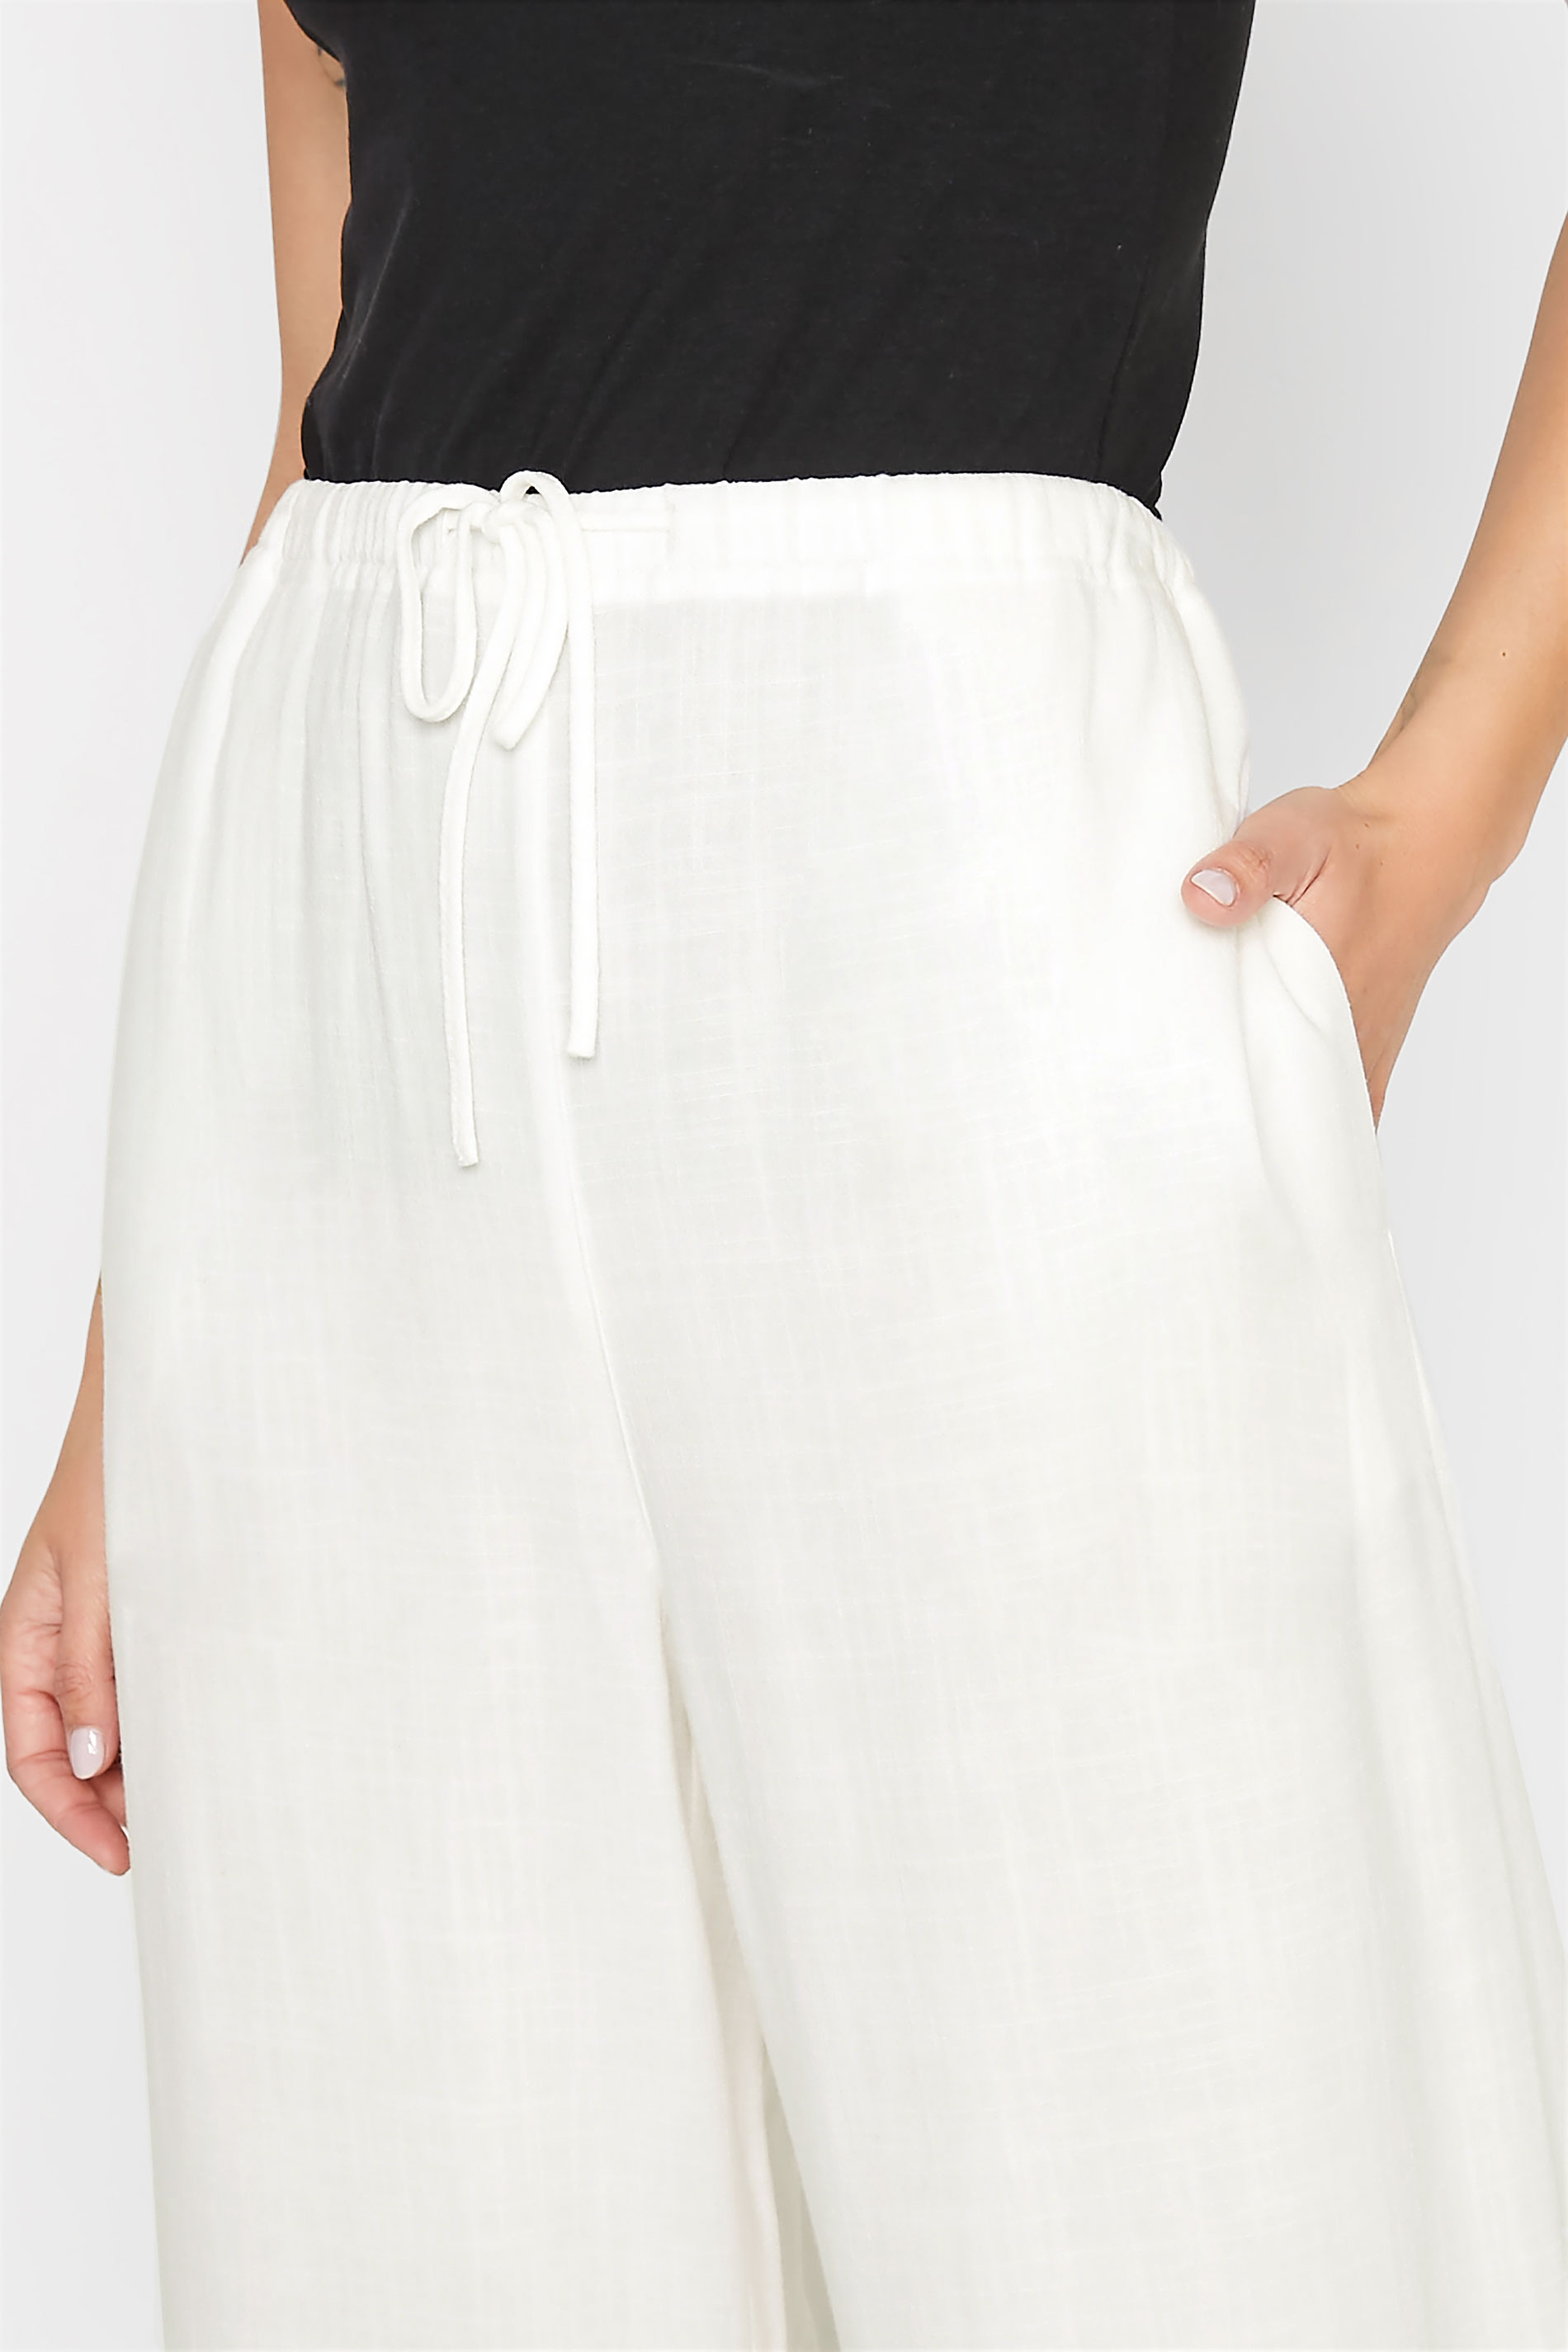 LTS Tall Women's White Linen Tie Waist Cropped Trousers | Long Tall Sally  3